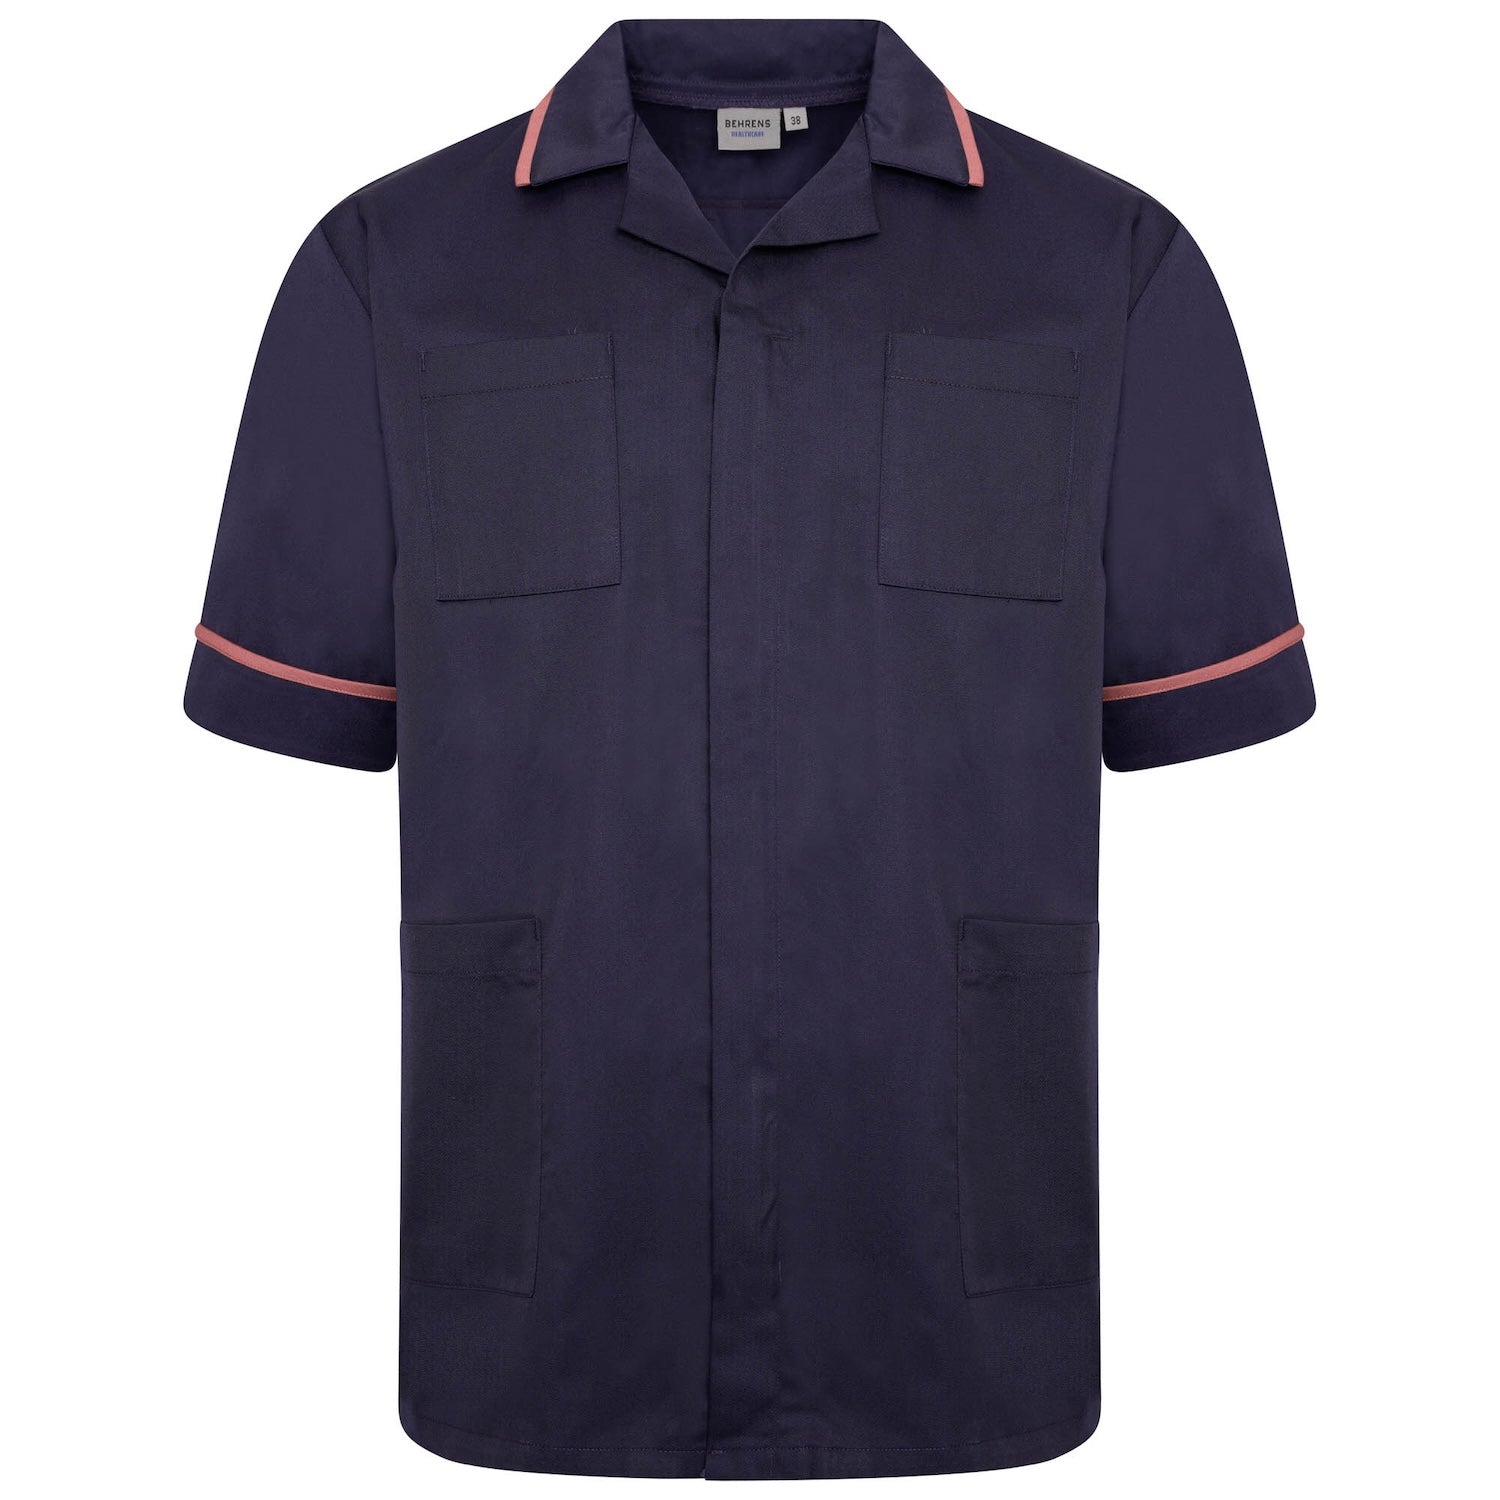 Mens Healthcare Tunic | Navy/Red Trim